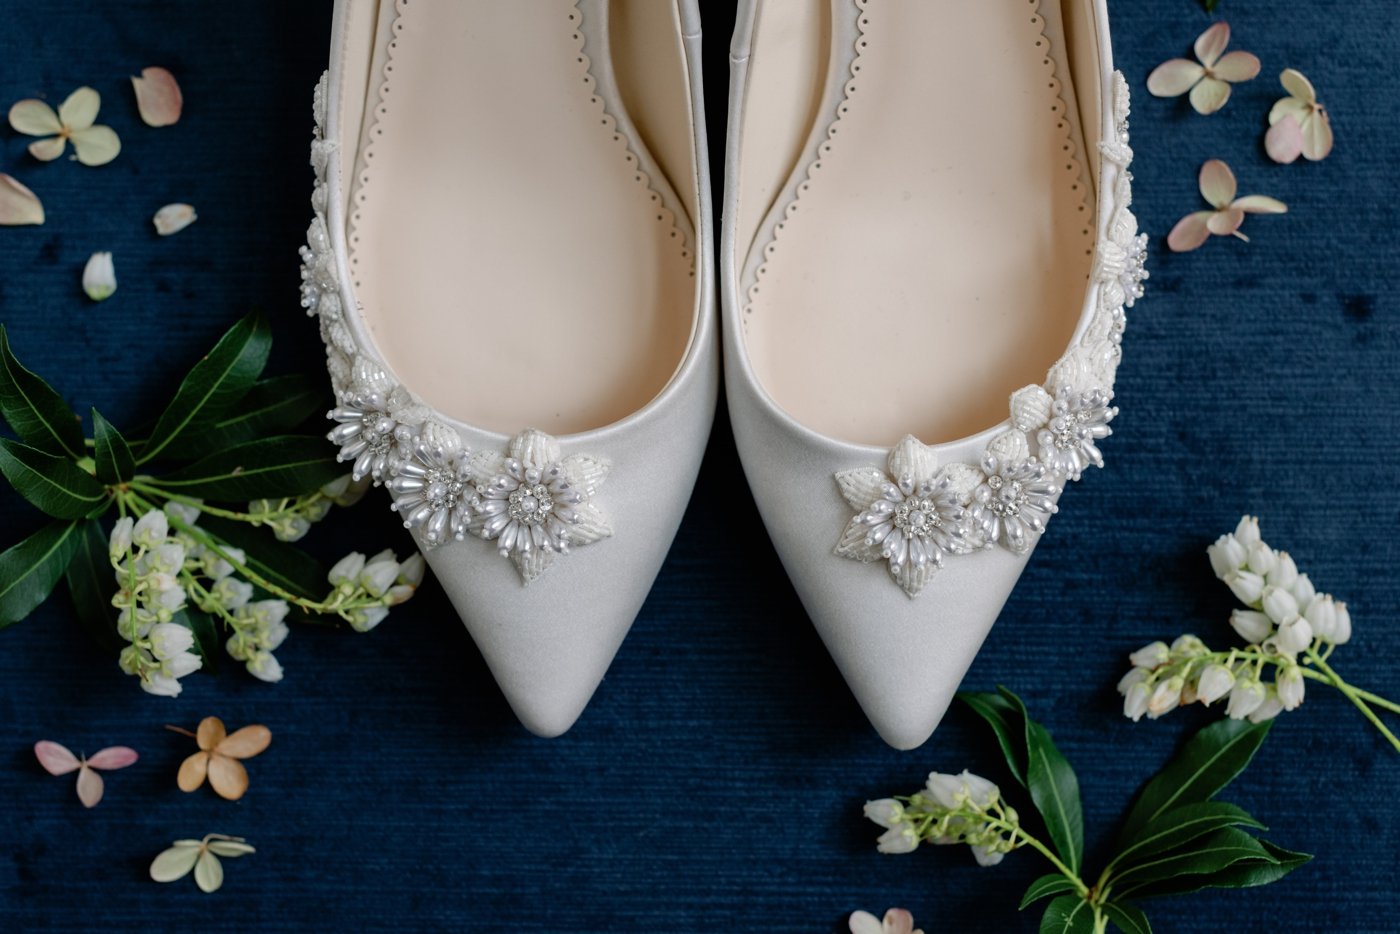 Pointed toe silver bridal shoes with crystal flower details from Bella Belle